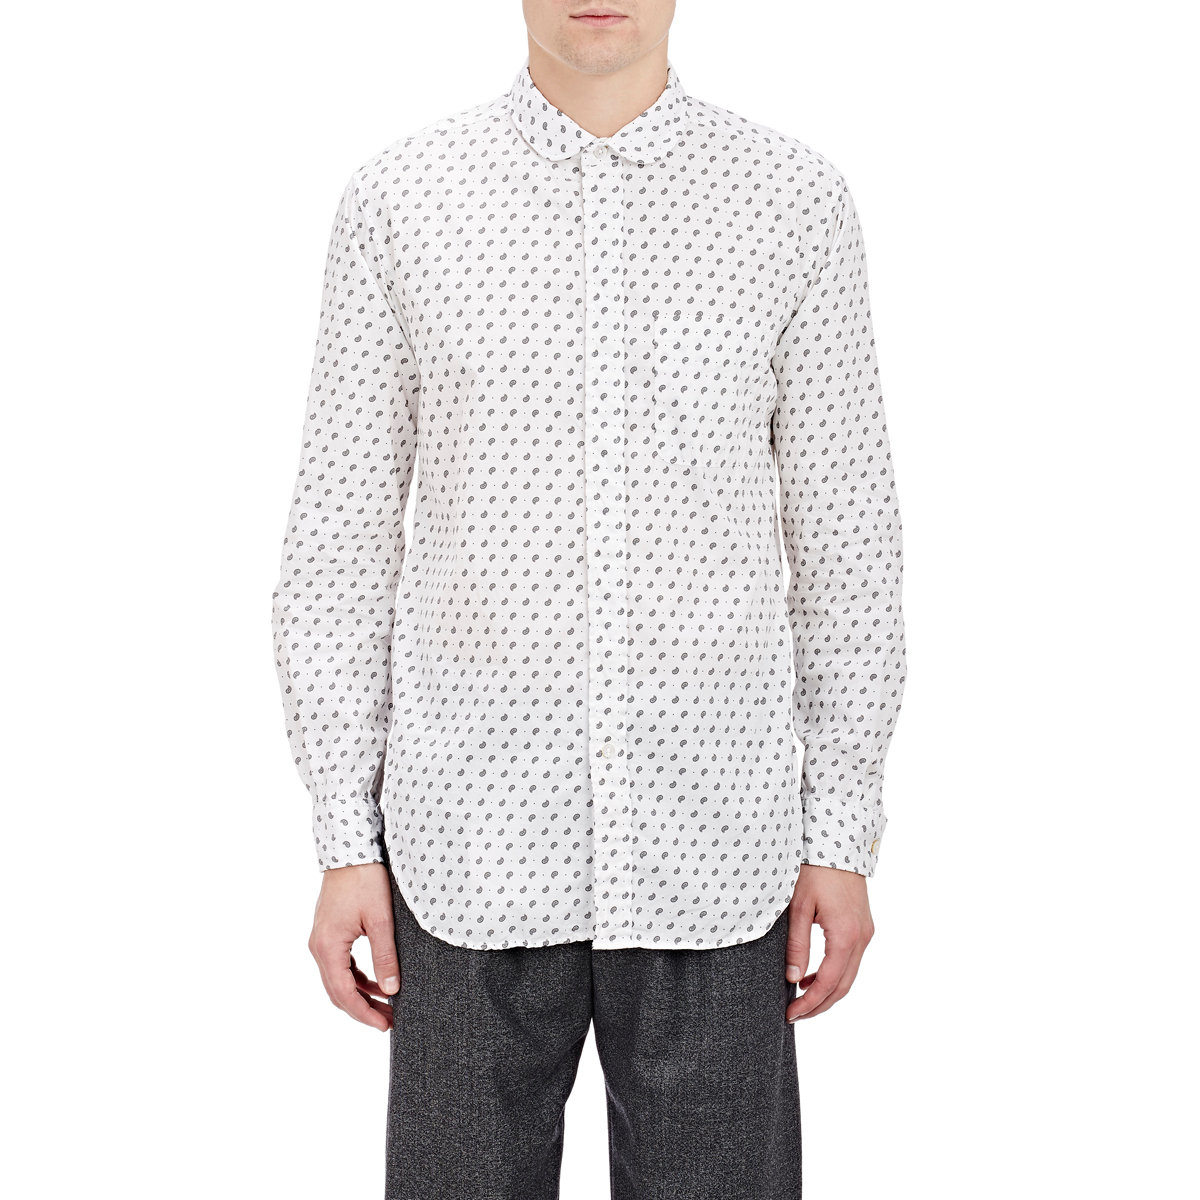 Lyst Engineered garments Paisley pattern  Shirt  in White  